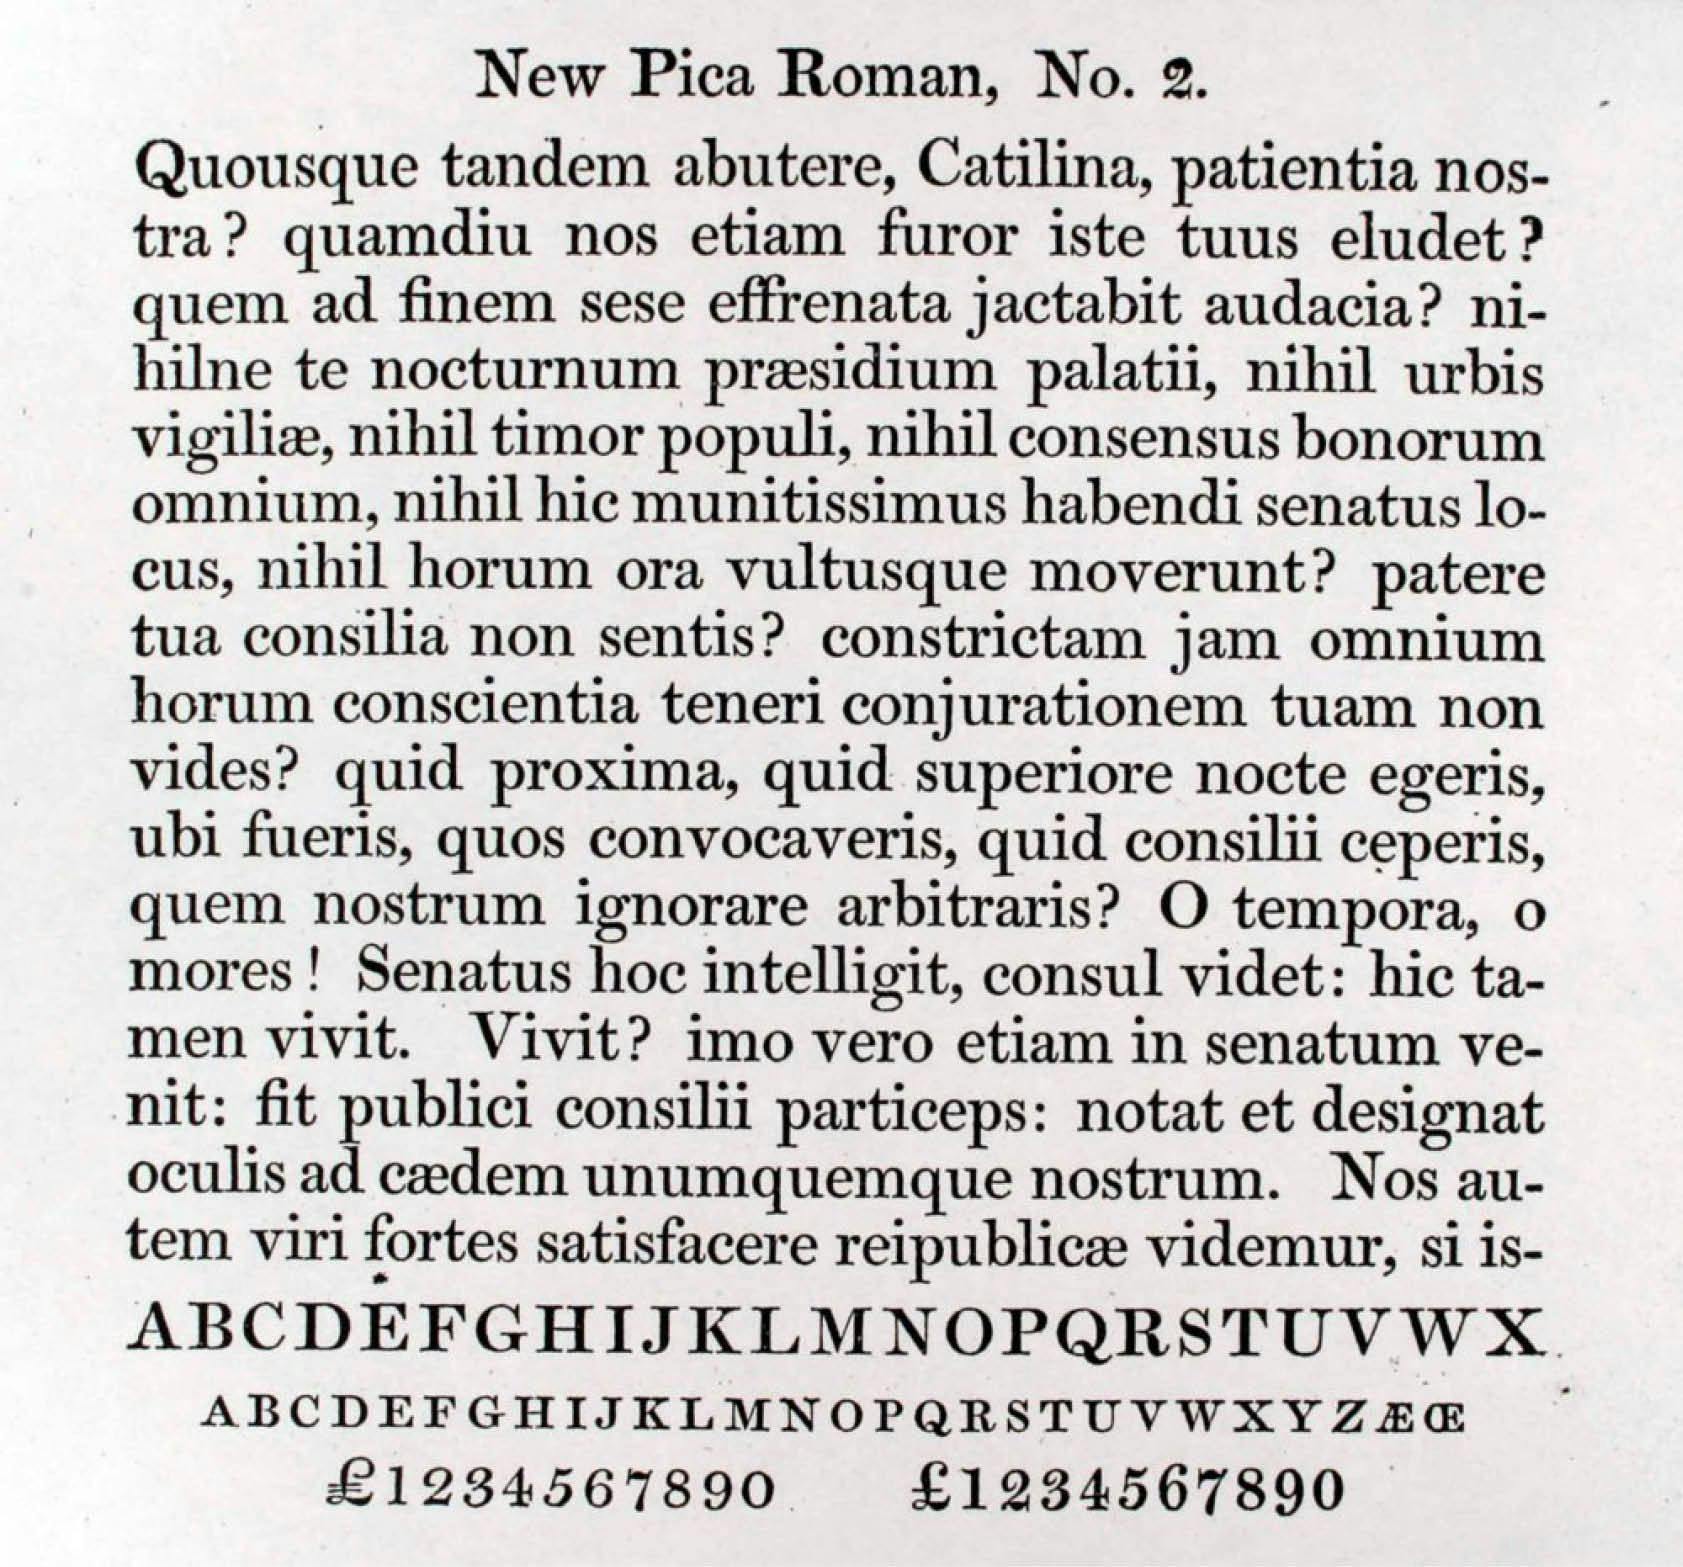 Miller New Pica Roman n°2, Miller & Richard 1812.
At this size the vertical rhythm appears quite well but is still balanced with the relative weight of serifs.